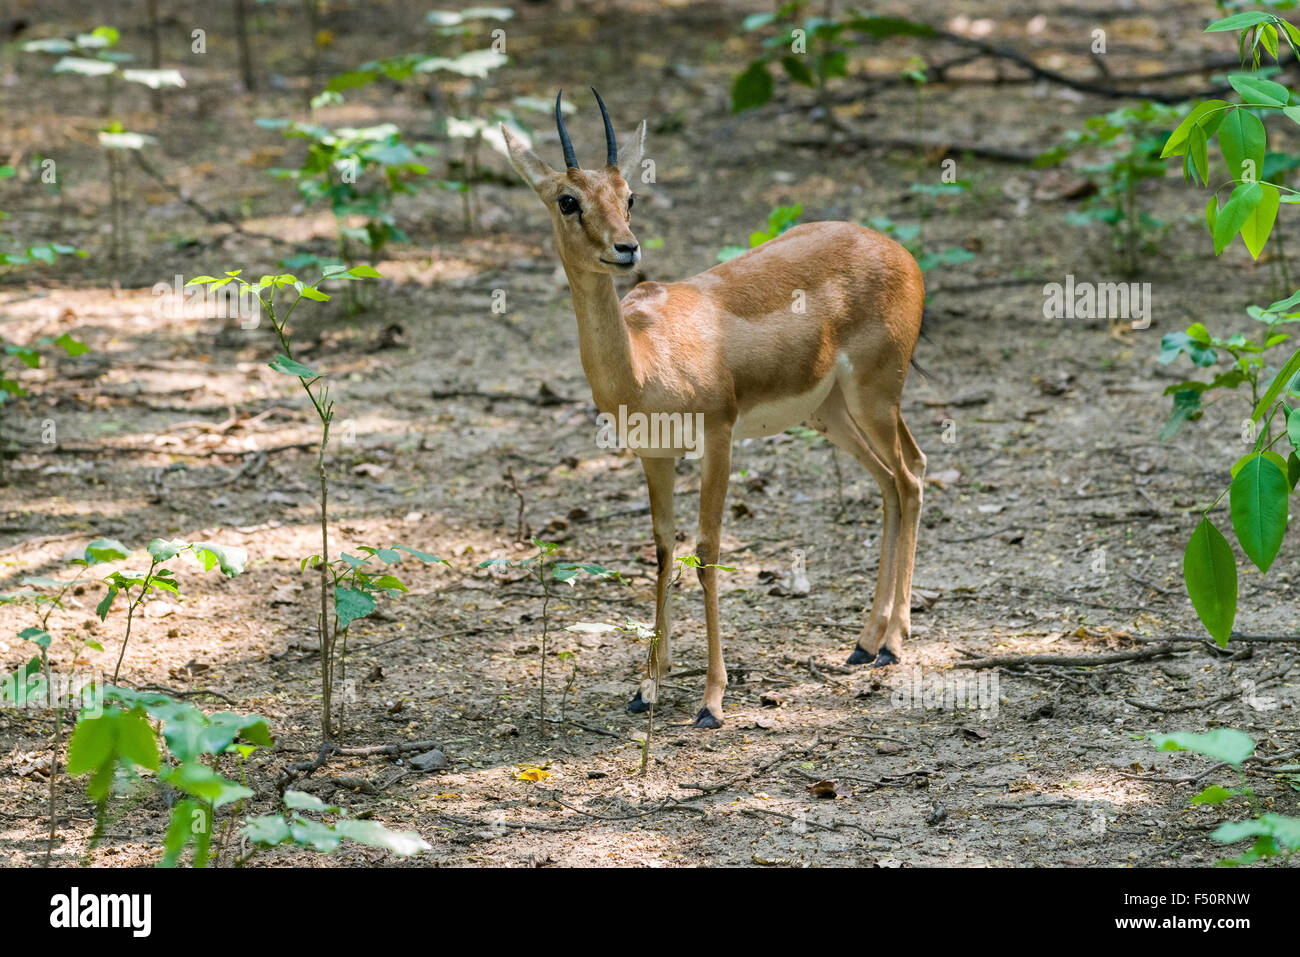 A Indian Gazelle (Gazzella bennettii) is standing between small trees in the zoo Stock Photo